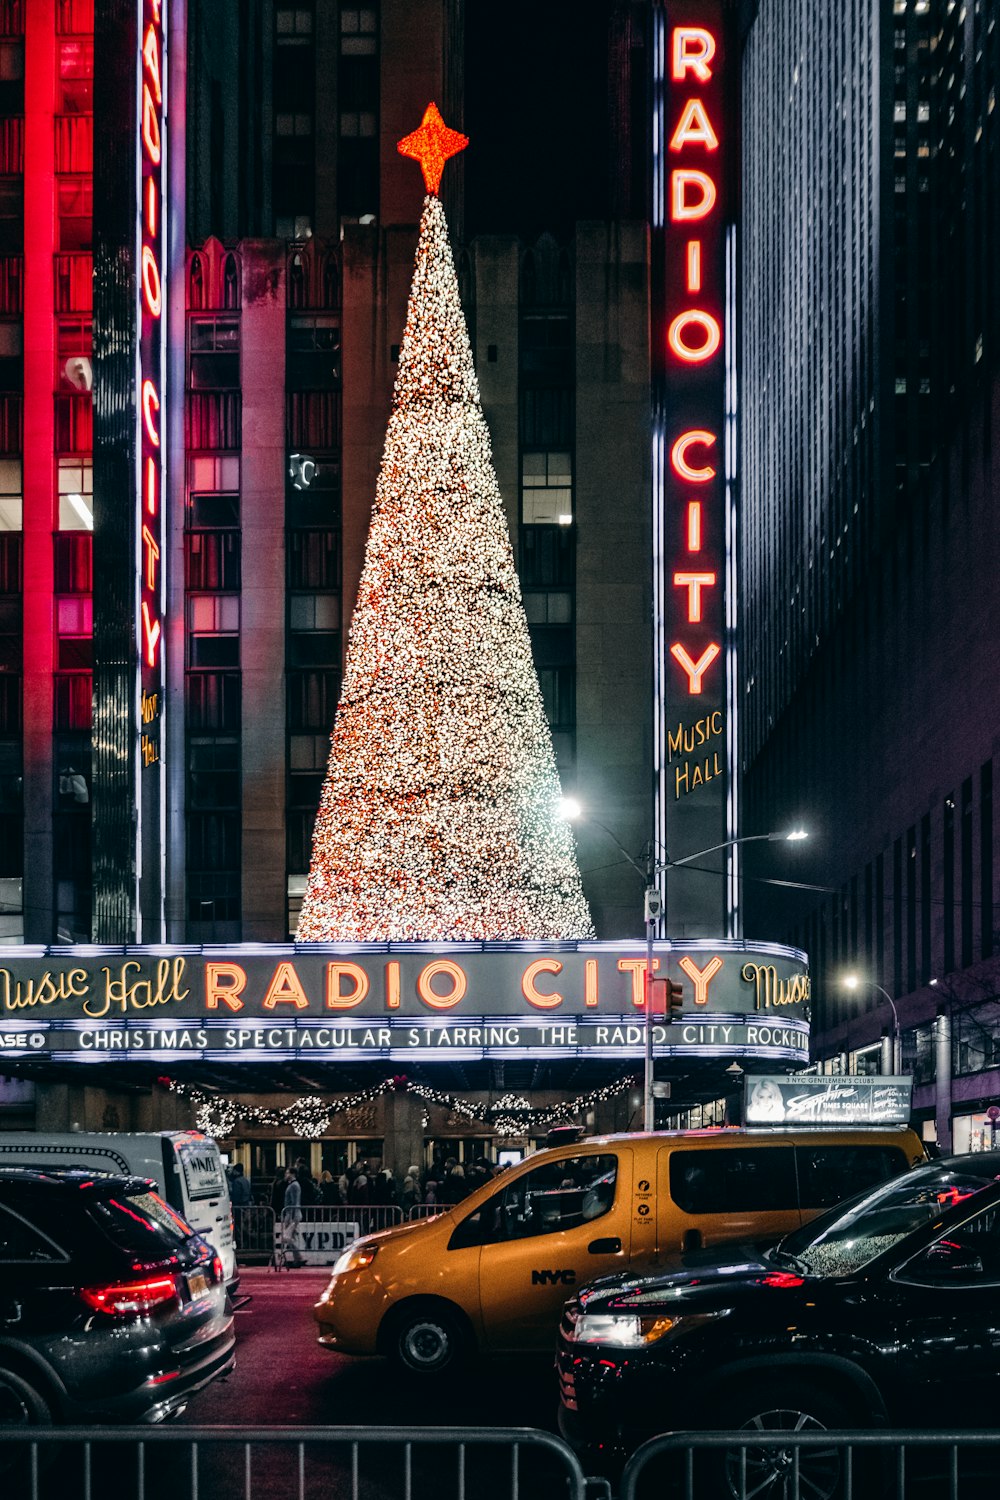 a radio city christmas tree in the middle of a city